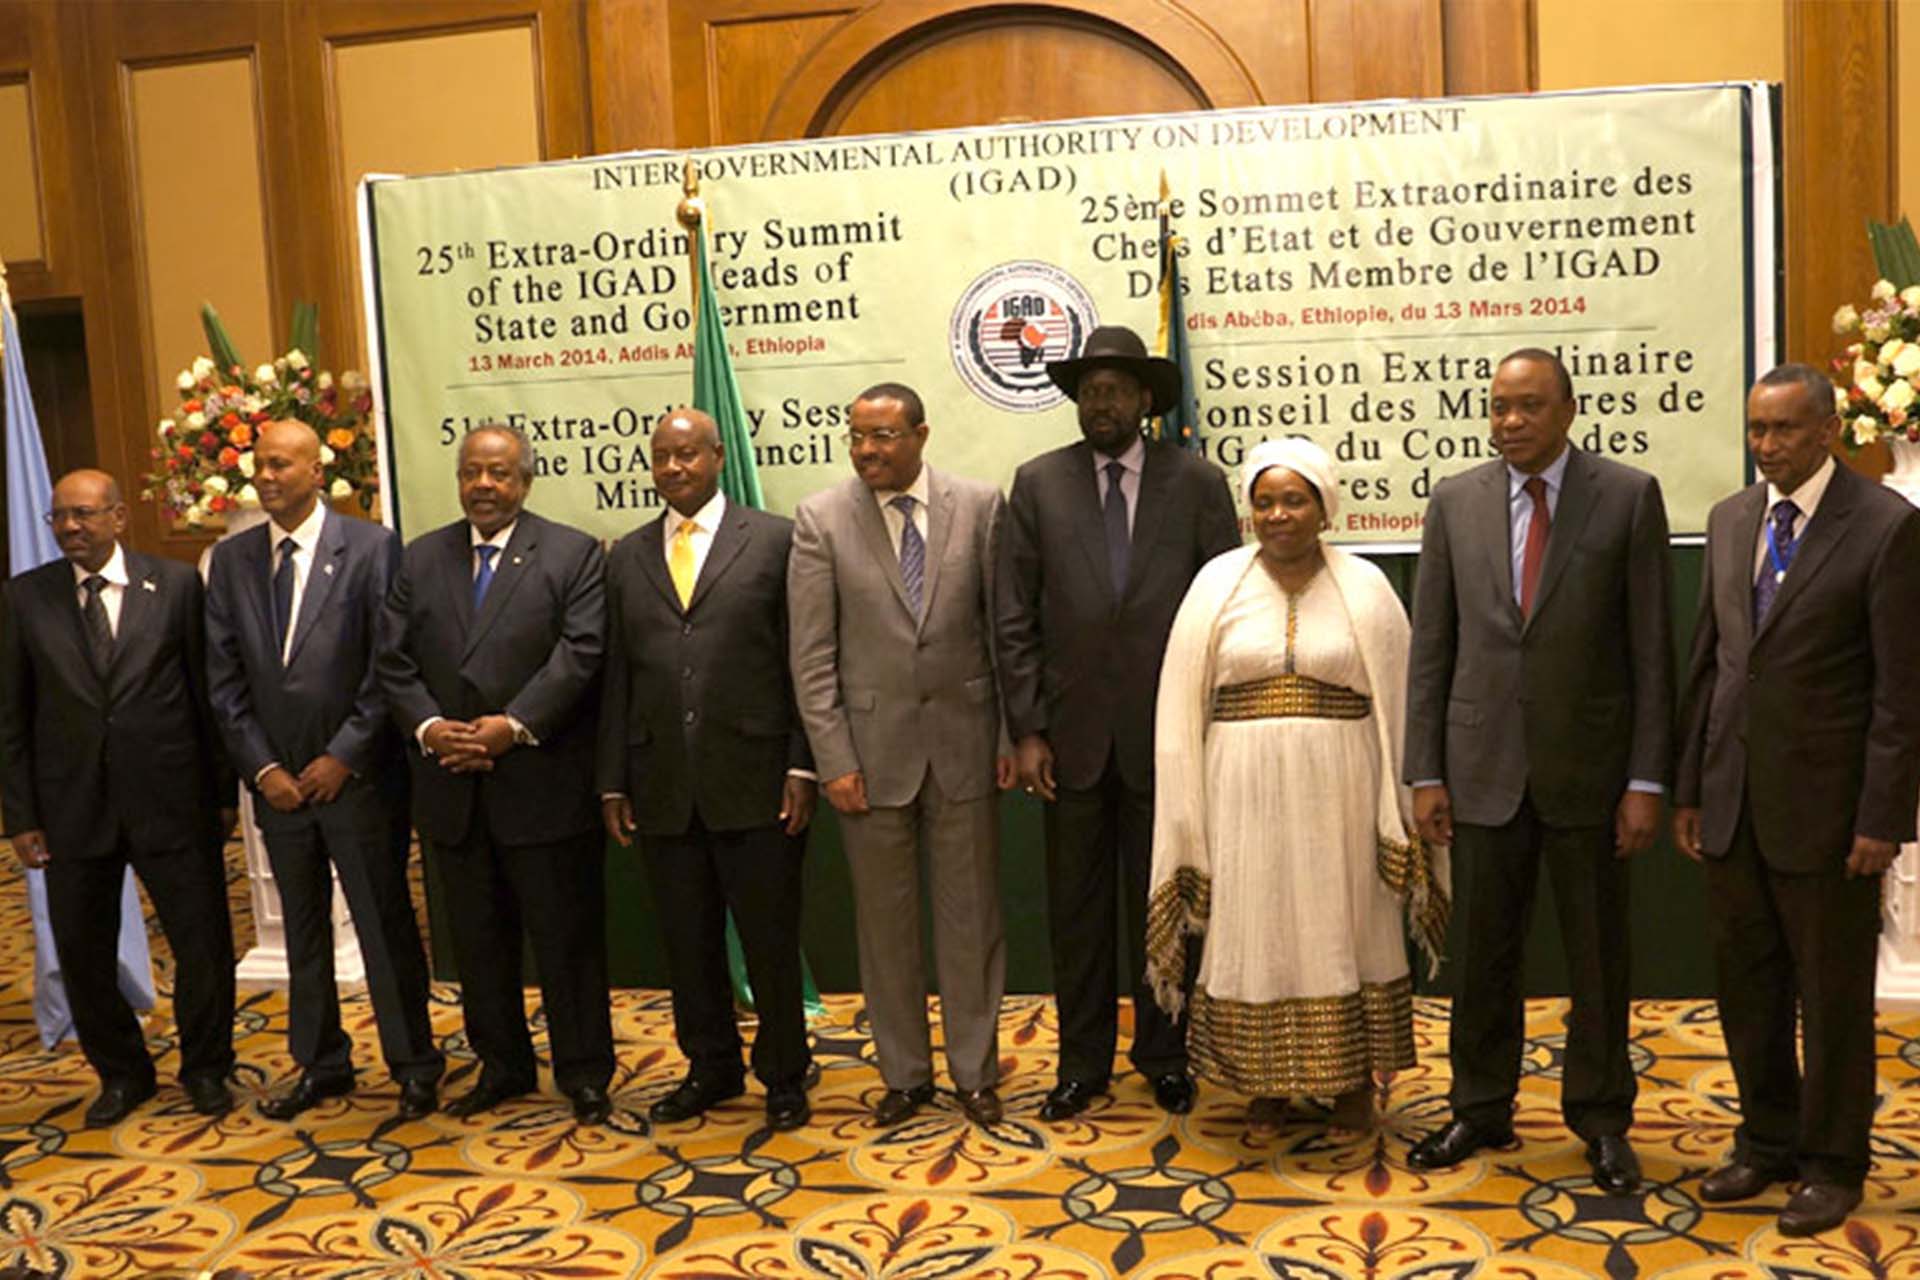 COMMUNIQUE OF THE 25th EXTRA-ORDINARY SESSION OF THE IGAD ASSEMBLY OF HEADS OF STATE AND GOVERNMENT ON THE SITUATION IN SOUTH SUDAN